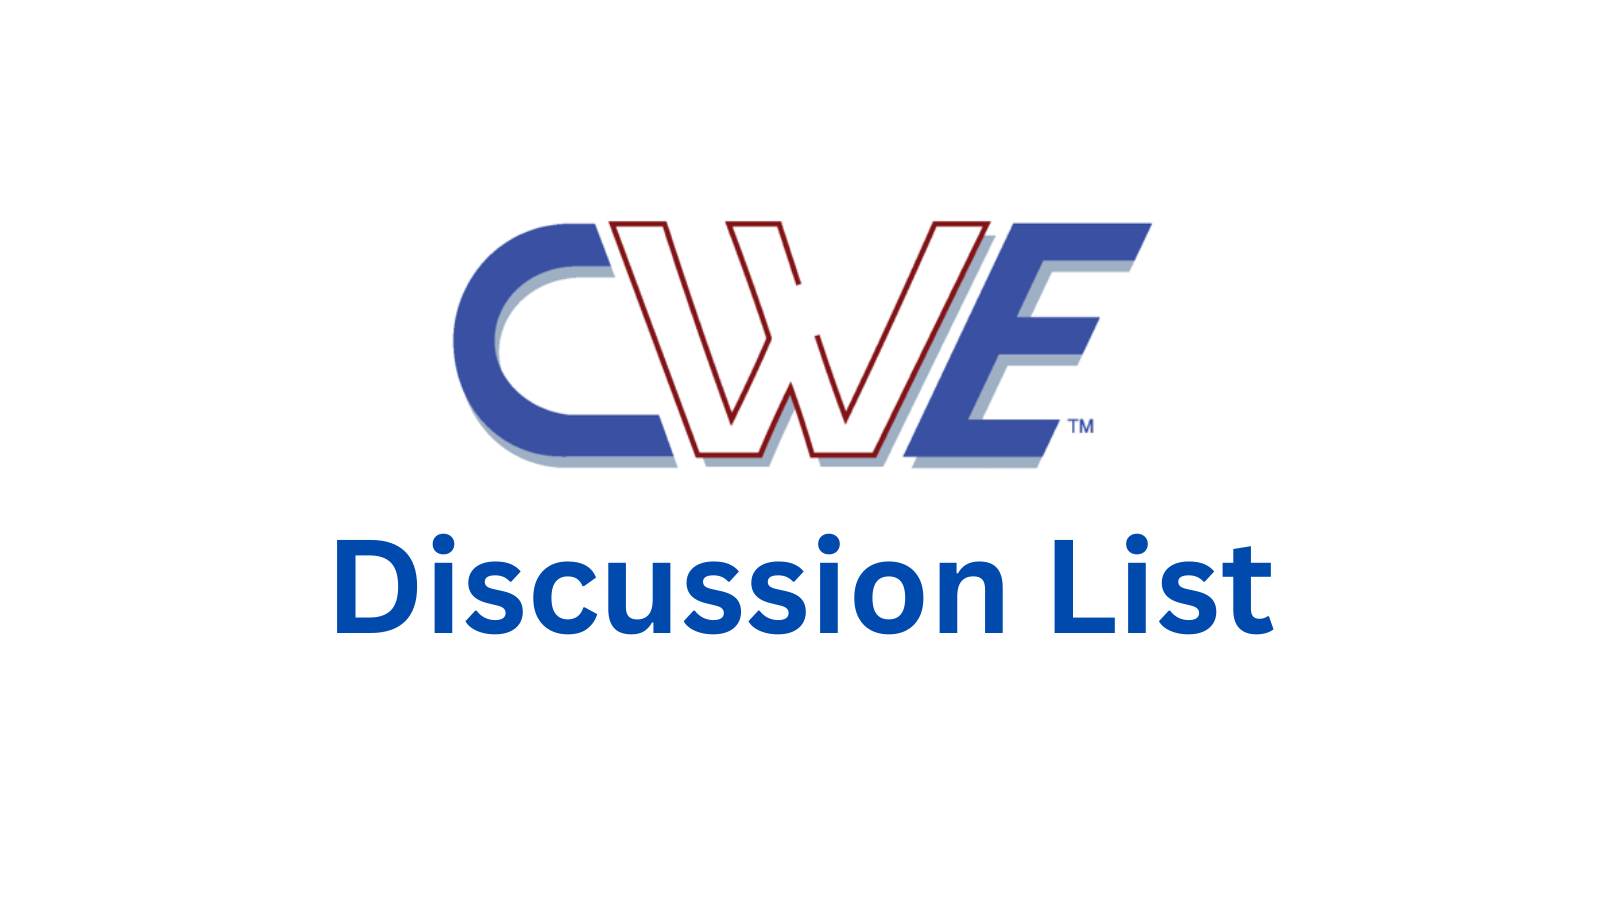 CWE Research Email Discussion List